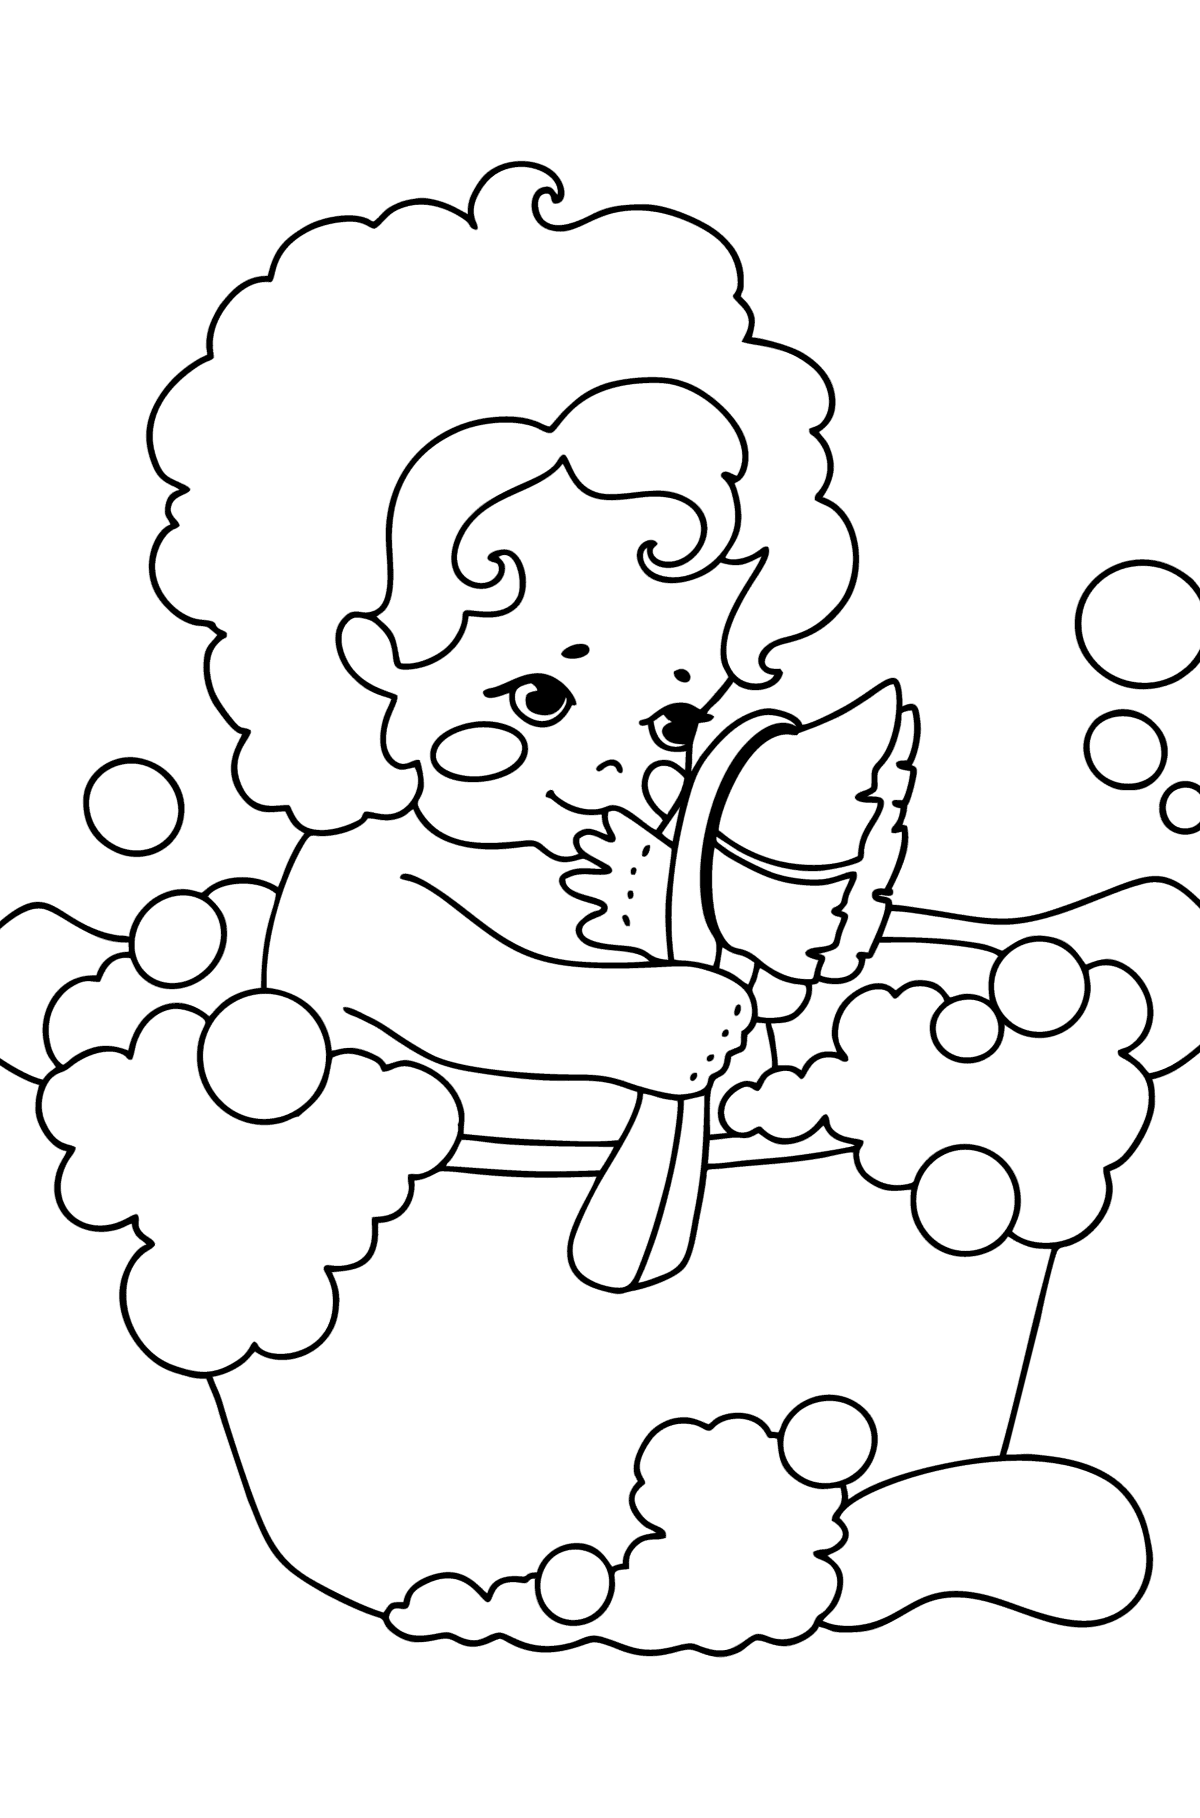 Baby bathes сoloring page - Coloring Pages for Kids